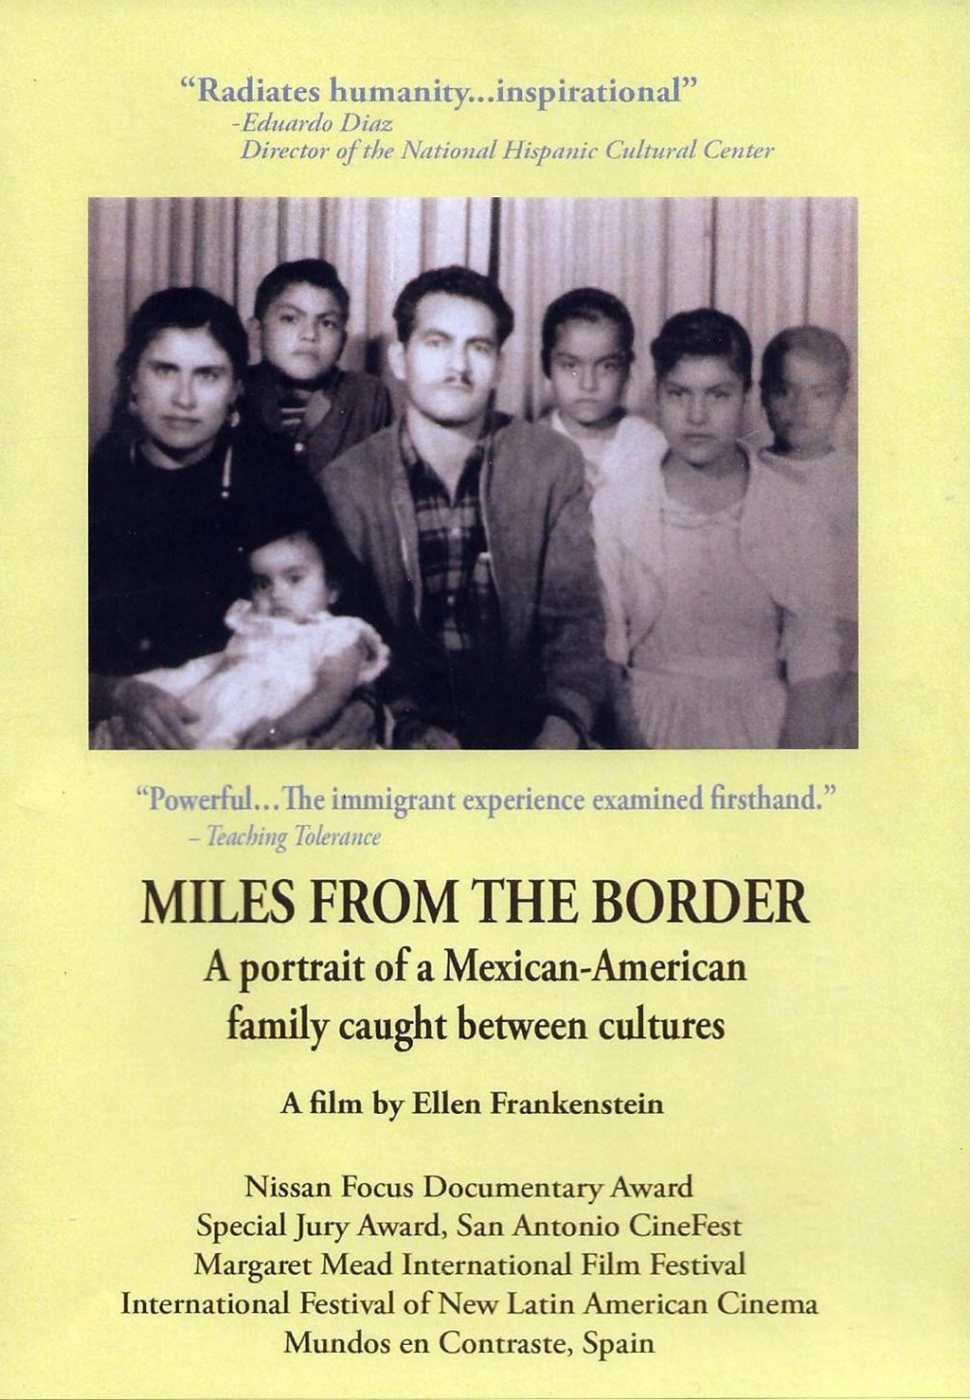 Cover of the documentary DVD.